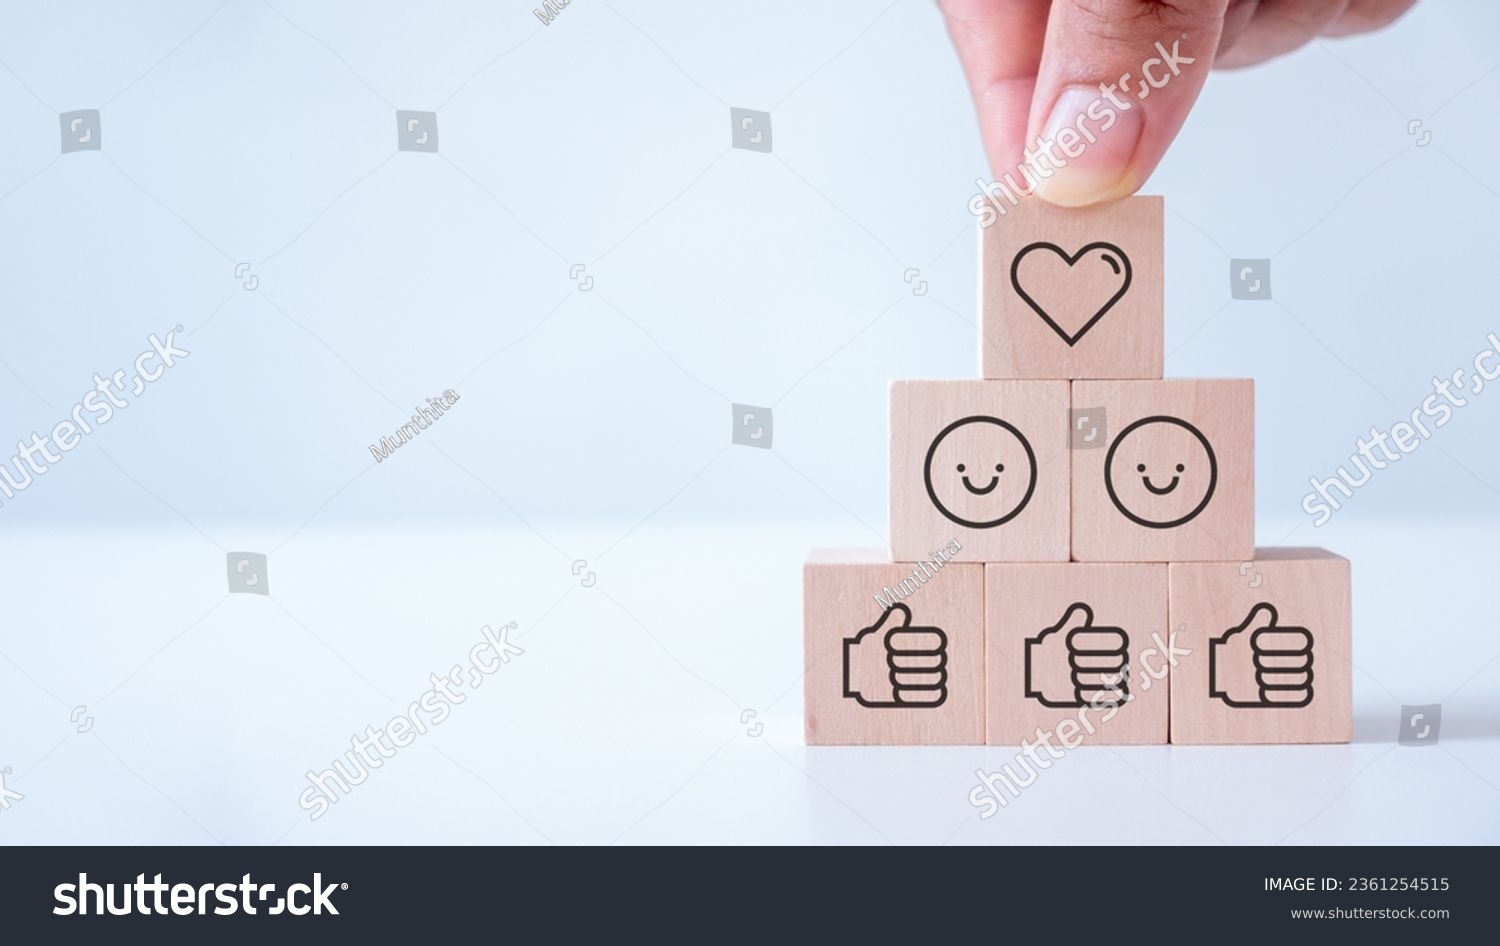 Digital marketing, Social media engagement concept. creating social media platforms to build relationships and drive sales. Sharing customer experiences. Placing the wooden cube blocks with emoticons. #2361254515